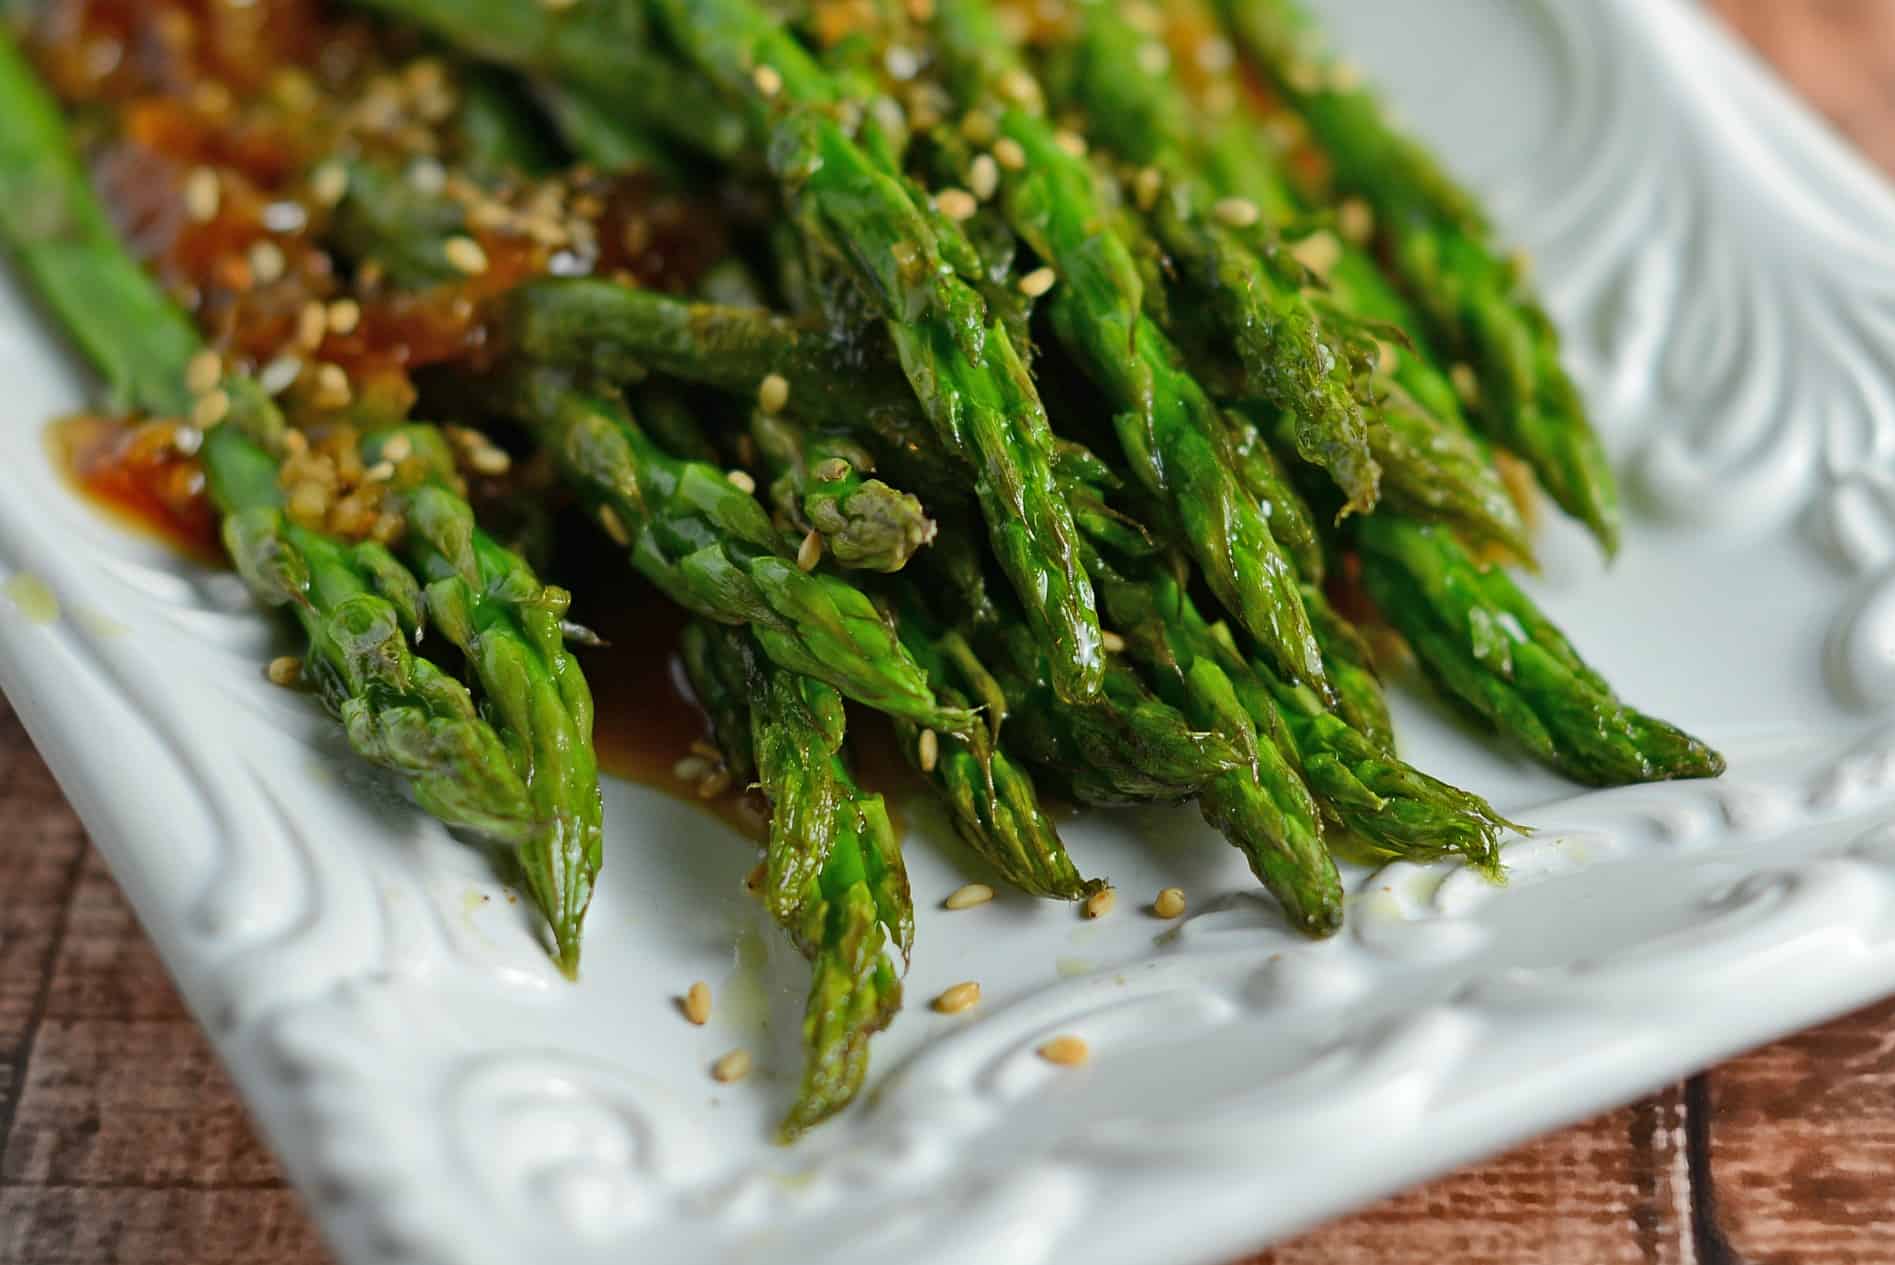 Roasted Asparagus with Apricot Sauce is an easy recipe for asparagus in the oven. The best asparagus side recipe out there! #roastedasparagus #asparagussidedishrecipe www.savoryexperiments.com 